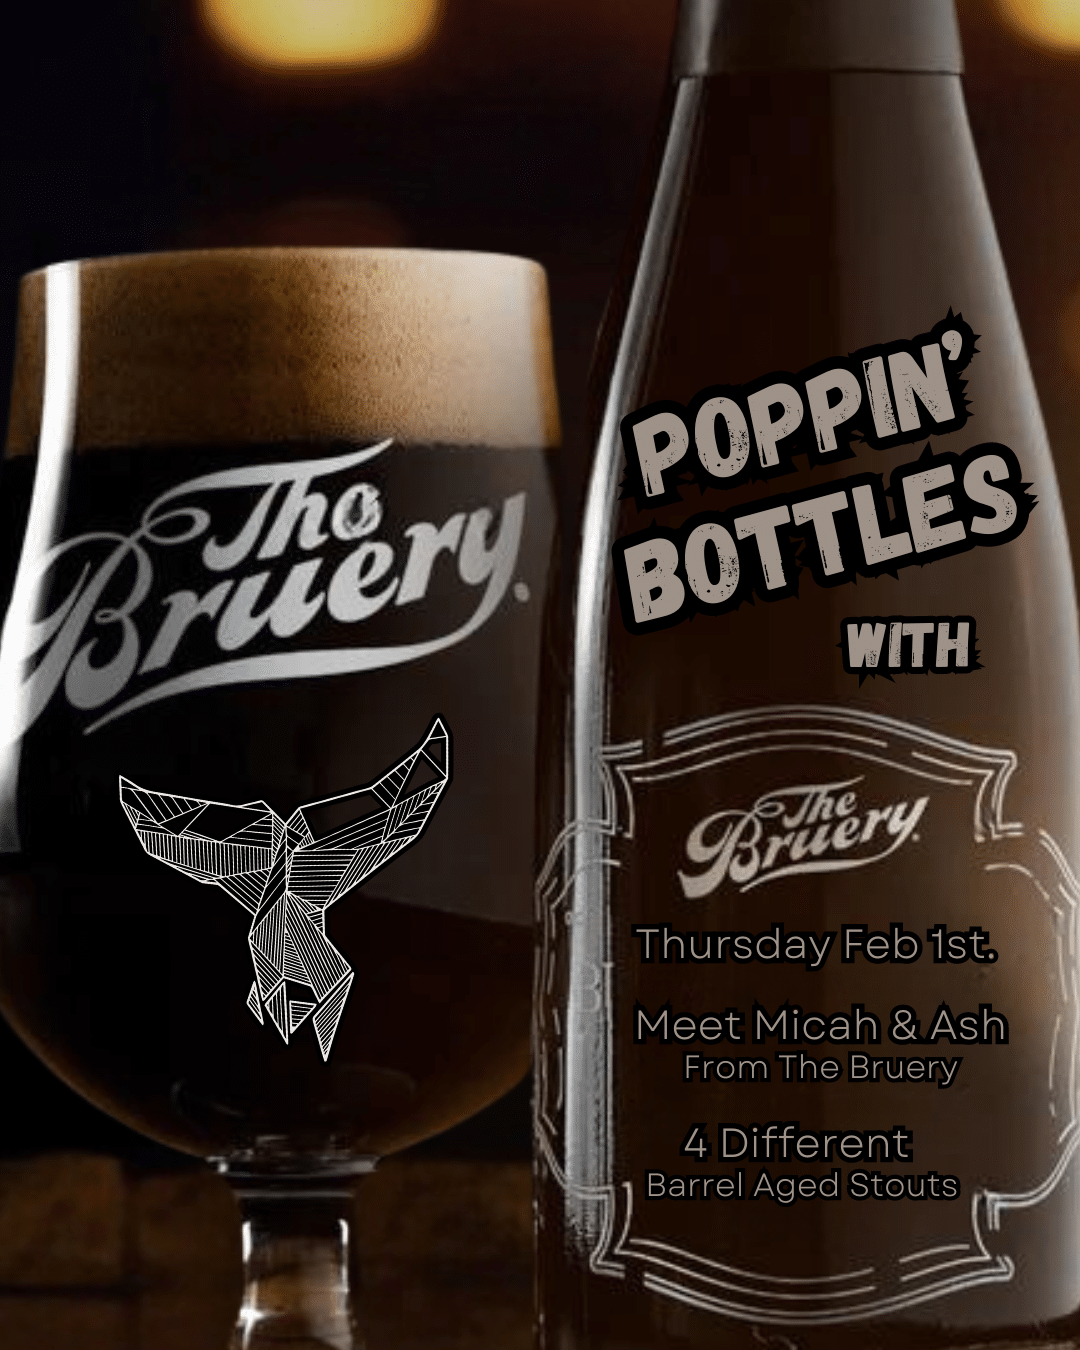 Poppin' Bottles with The Bruery